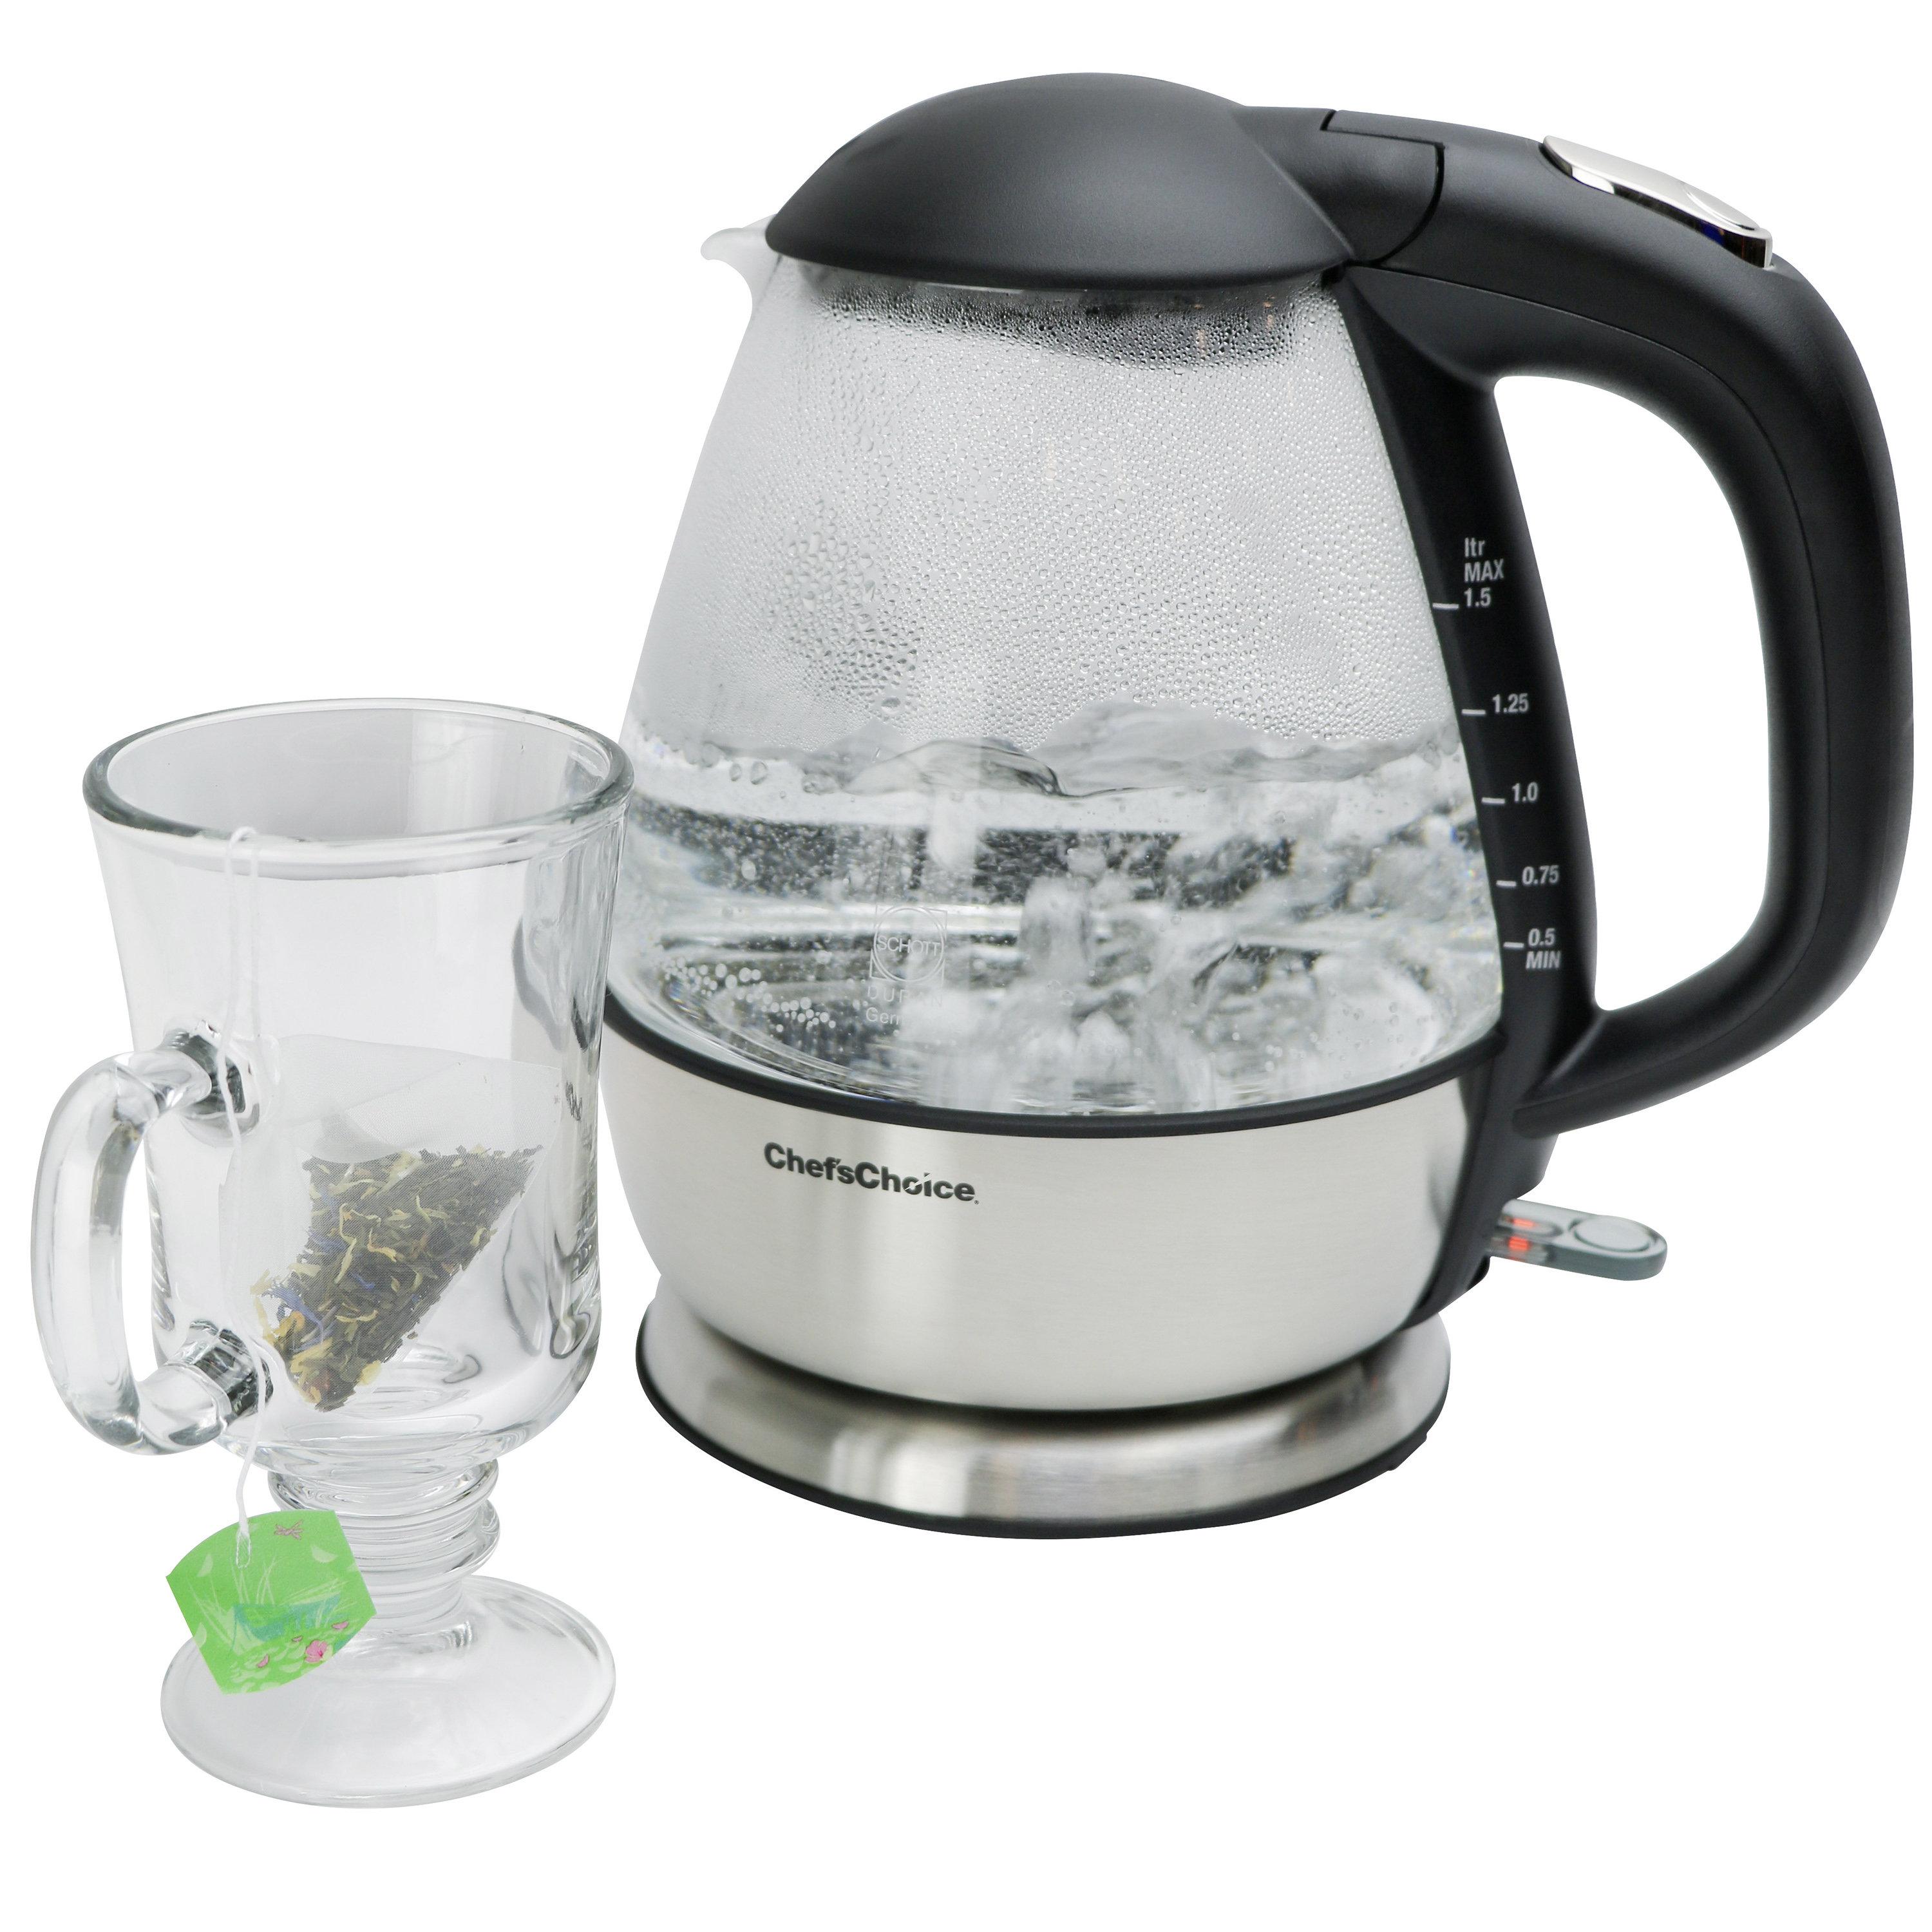 Ovente Electric Glass Kettle - 1.5 Liters - Black